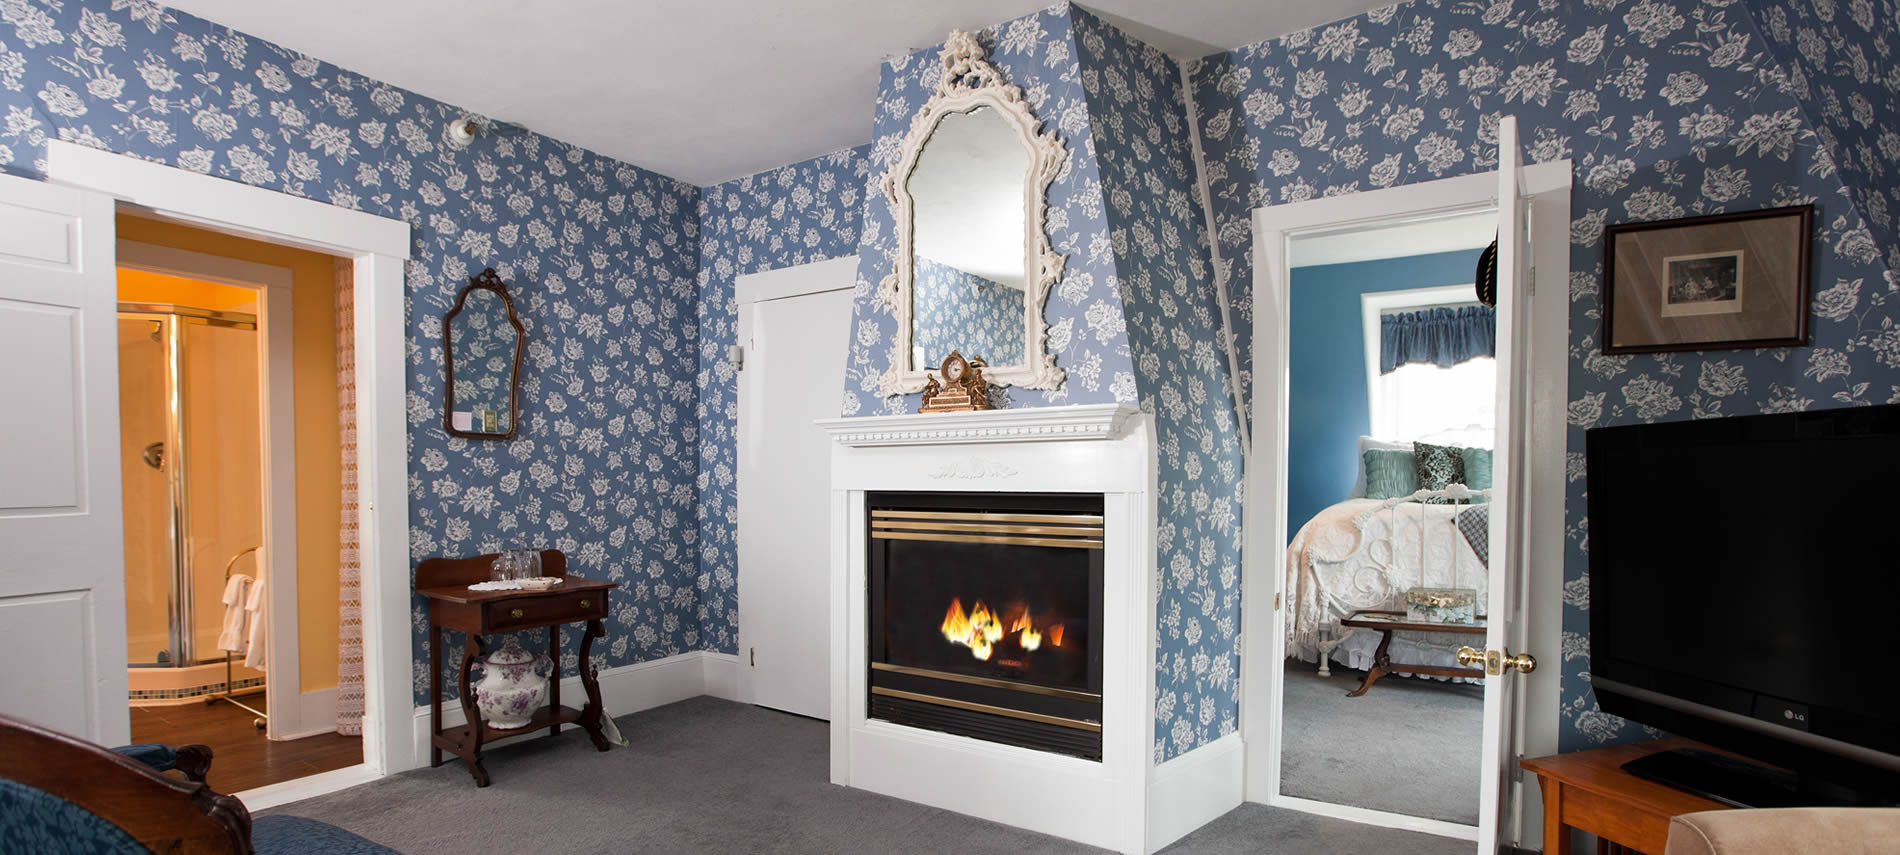 Princess Victoria guest room, blue and white wallpaper, white trim and doors, and fireplace